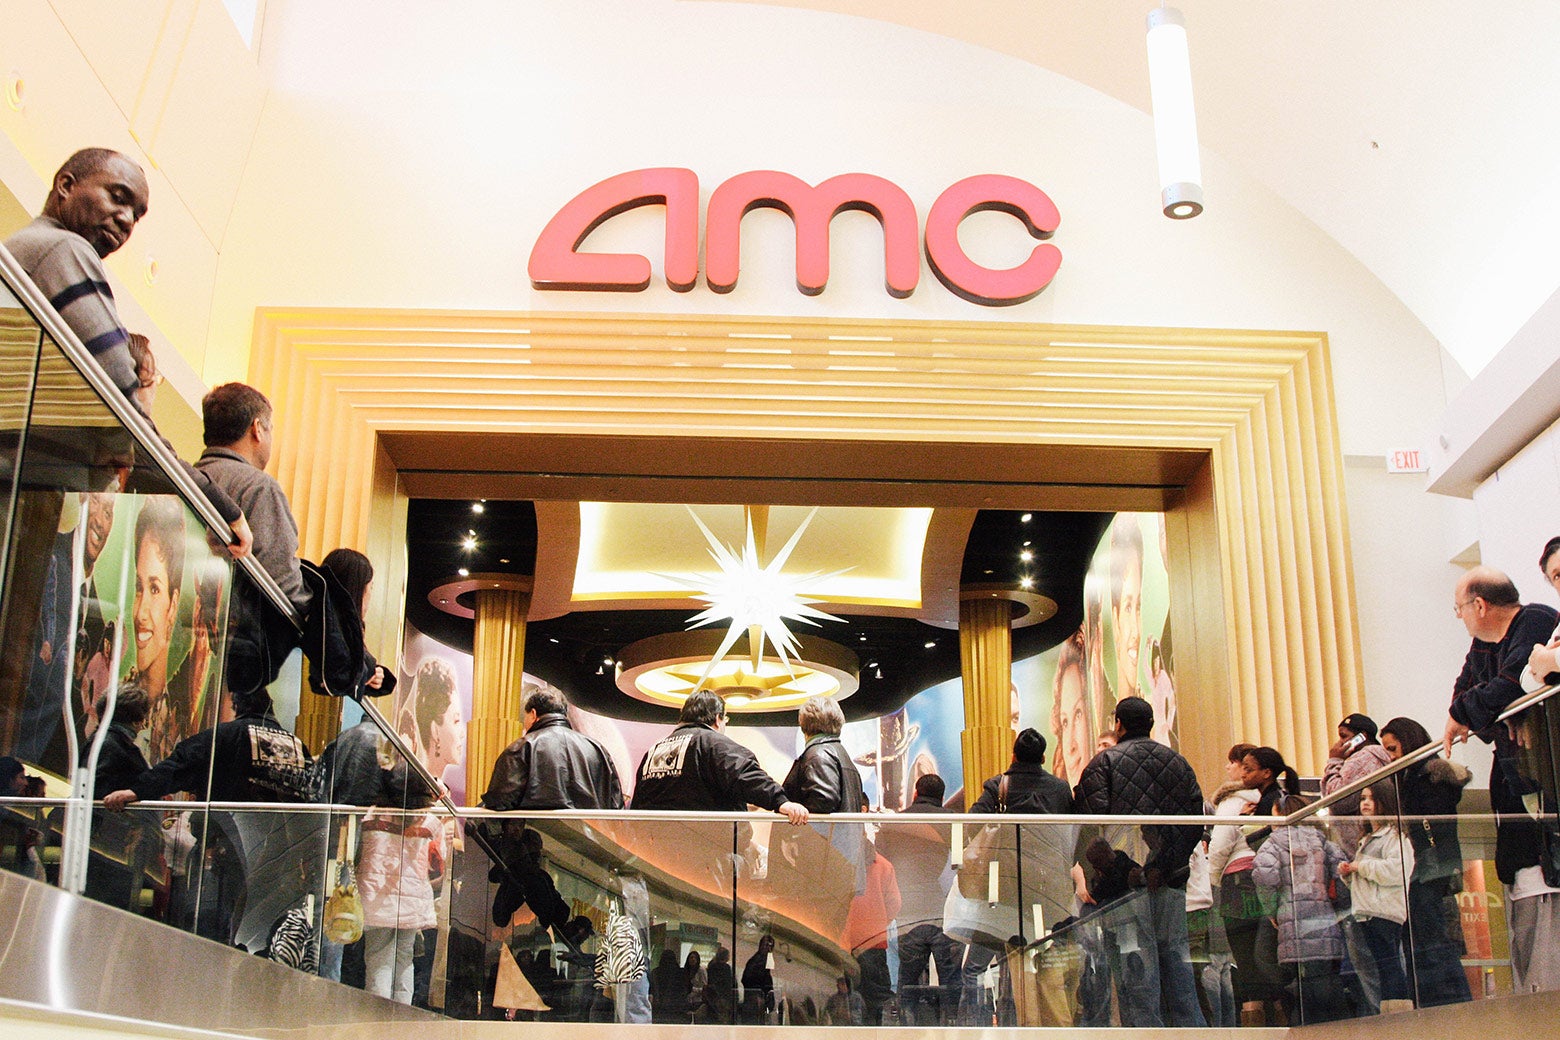 People waiting in line at the AMC movie theater on Feb. 14, 2008 in Paramus, New Jersey.